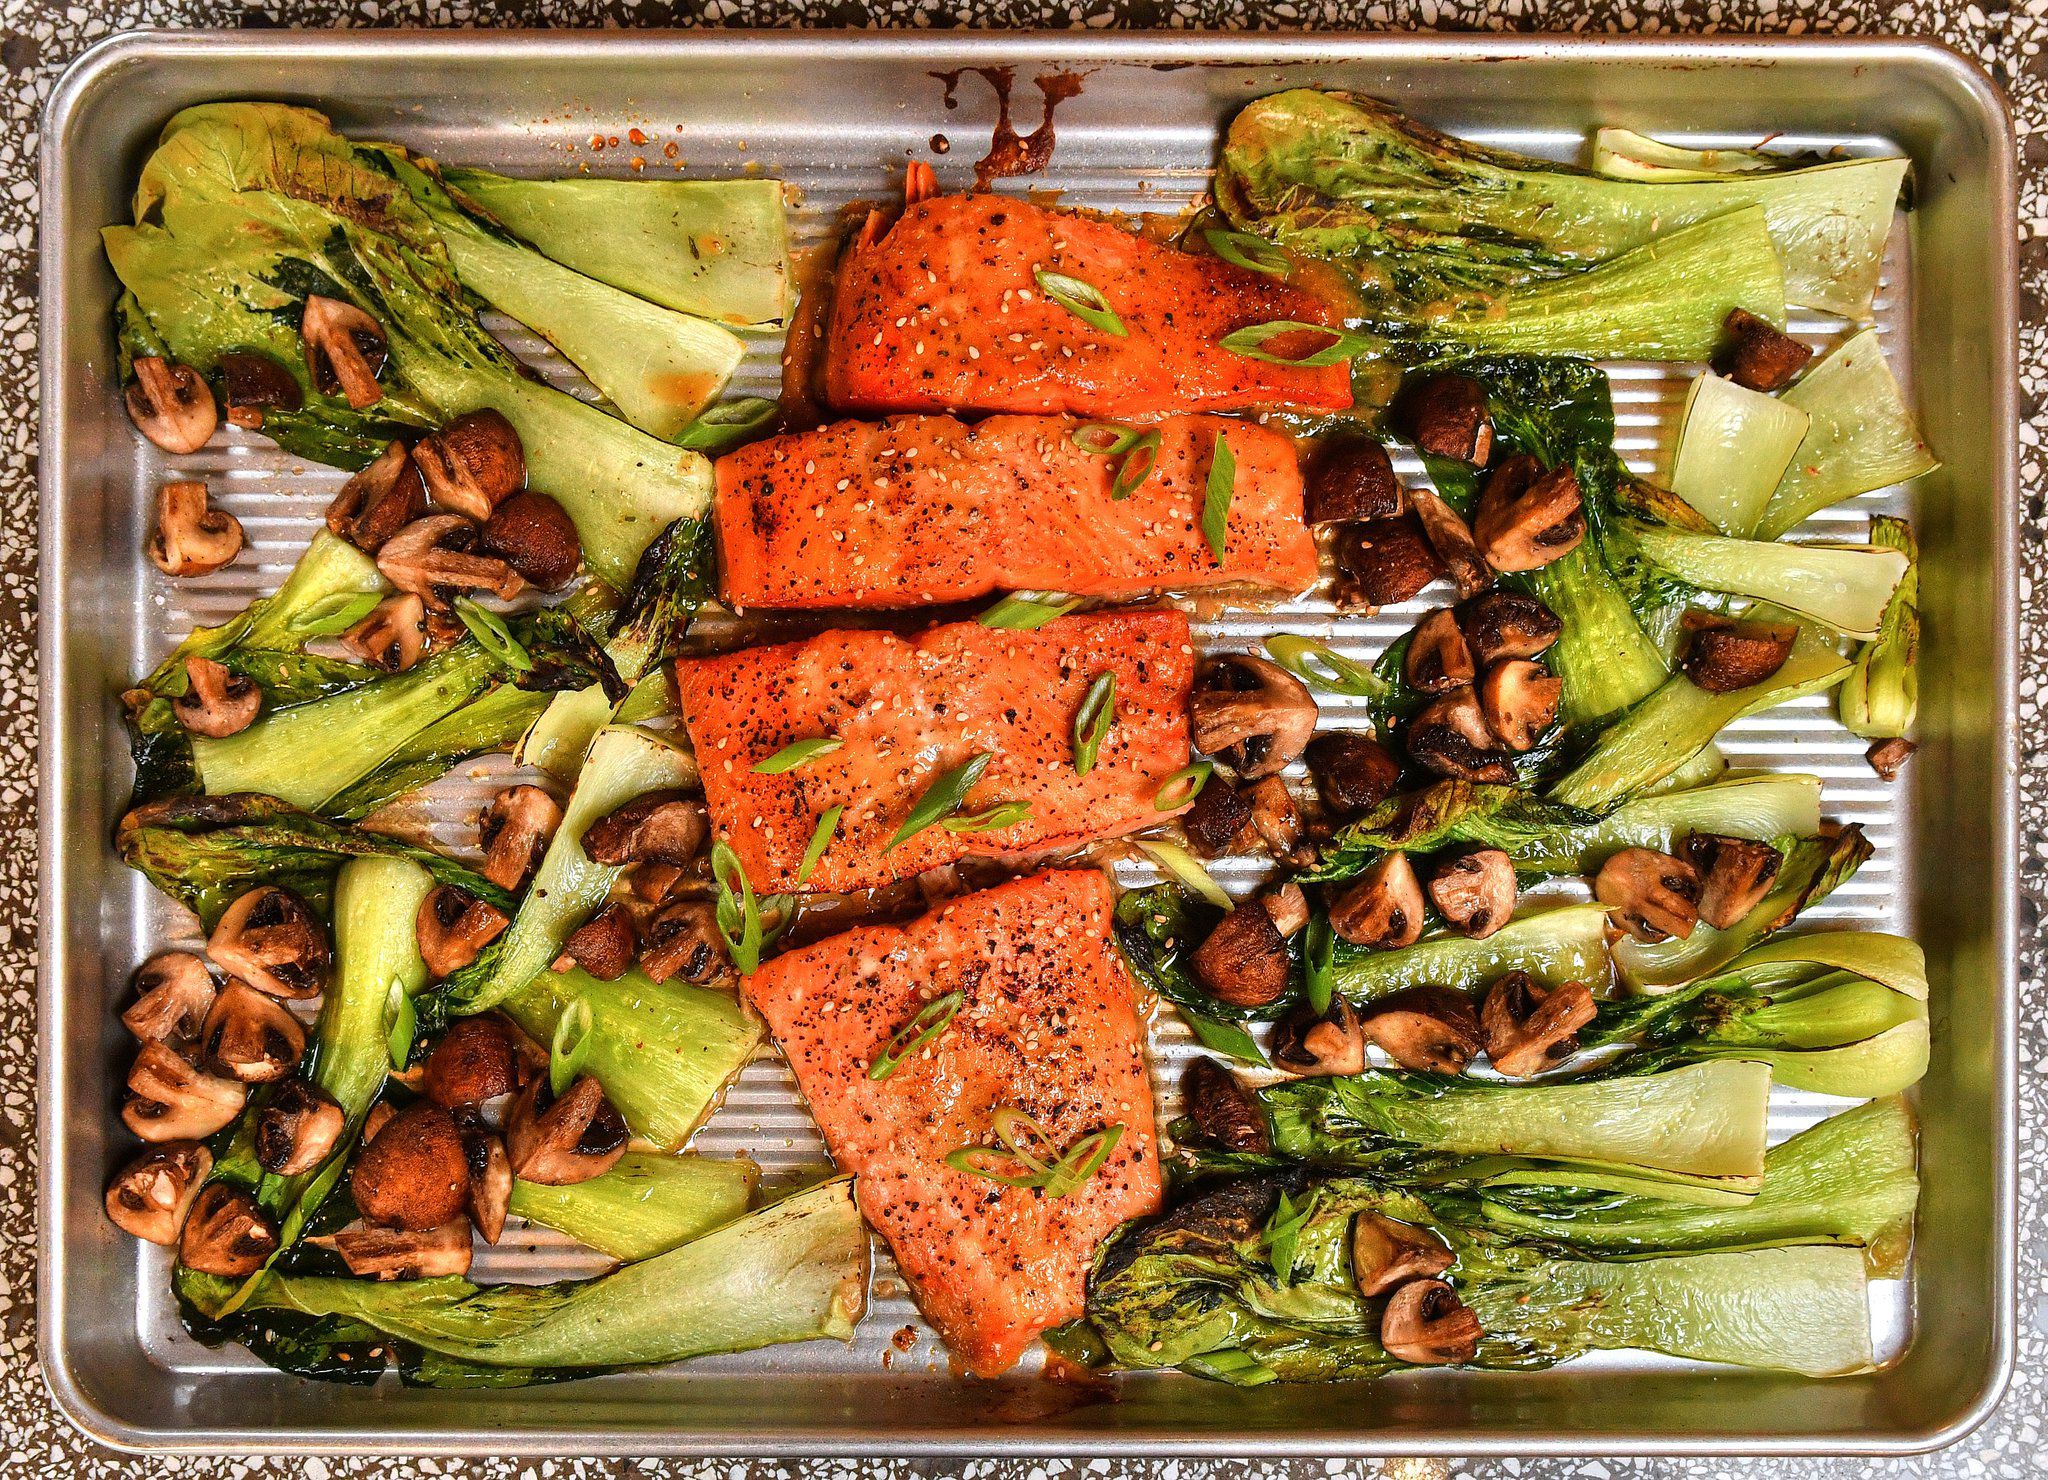 How one sheet pan can lead to many different meals